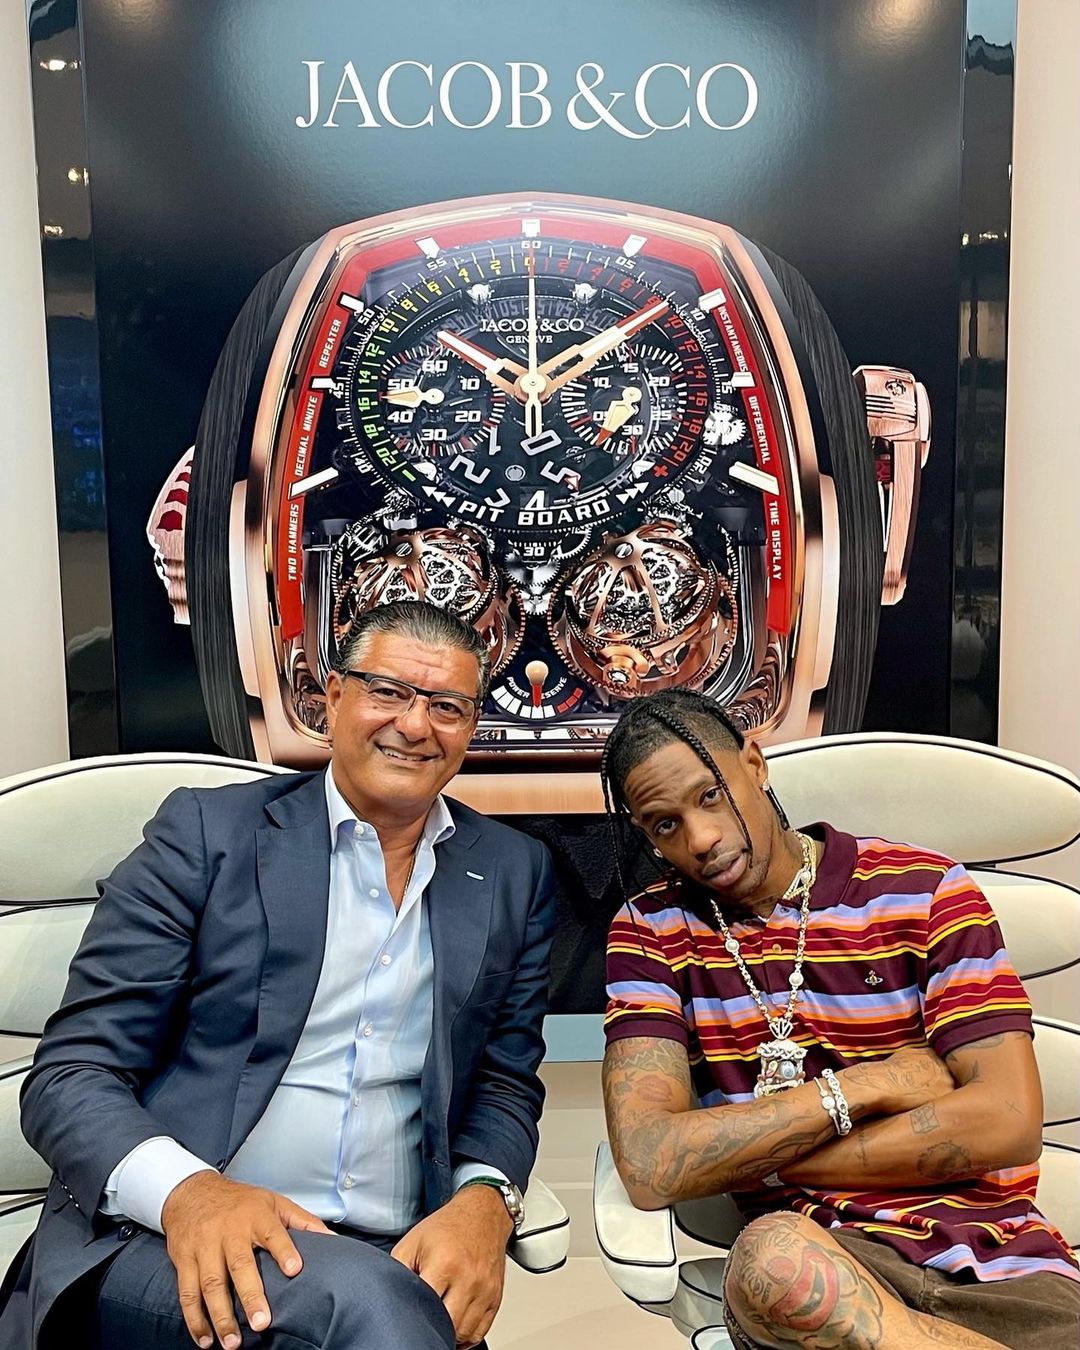 Oh, you won't believe the spectacle that went down earlier this year when @travisscott got his hands on the eye-popping @jacobandco Brilliant Full Baguette Rainbow timepiece! It's like he decided to become a walking treasure chest, showcasing 434 multi-colored sapphires in one watch!